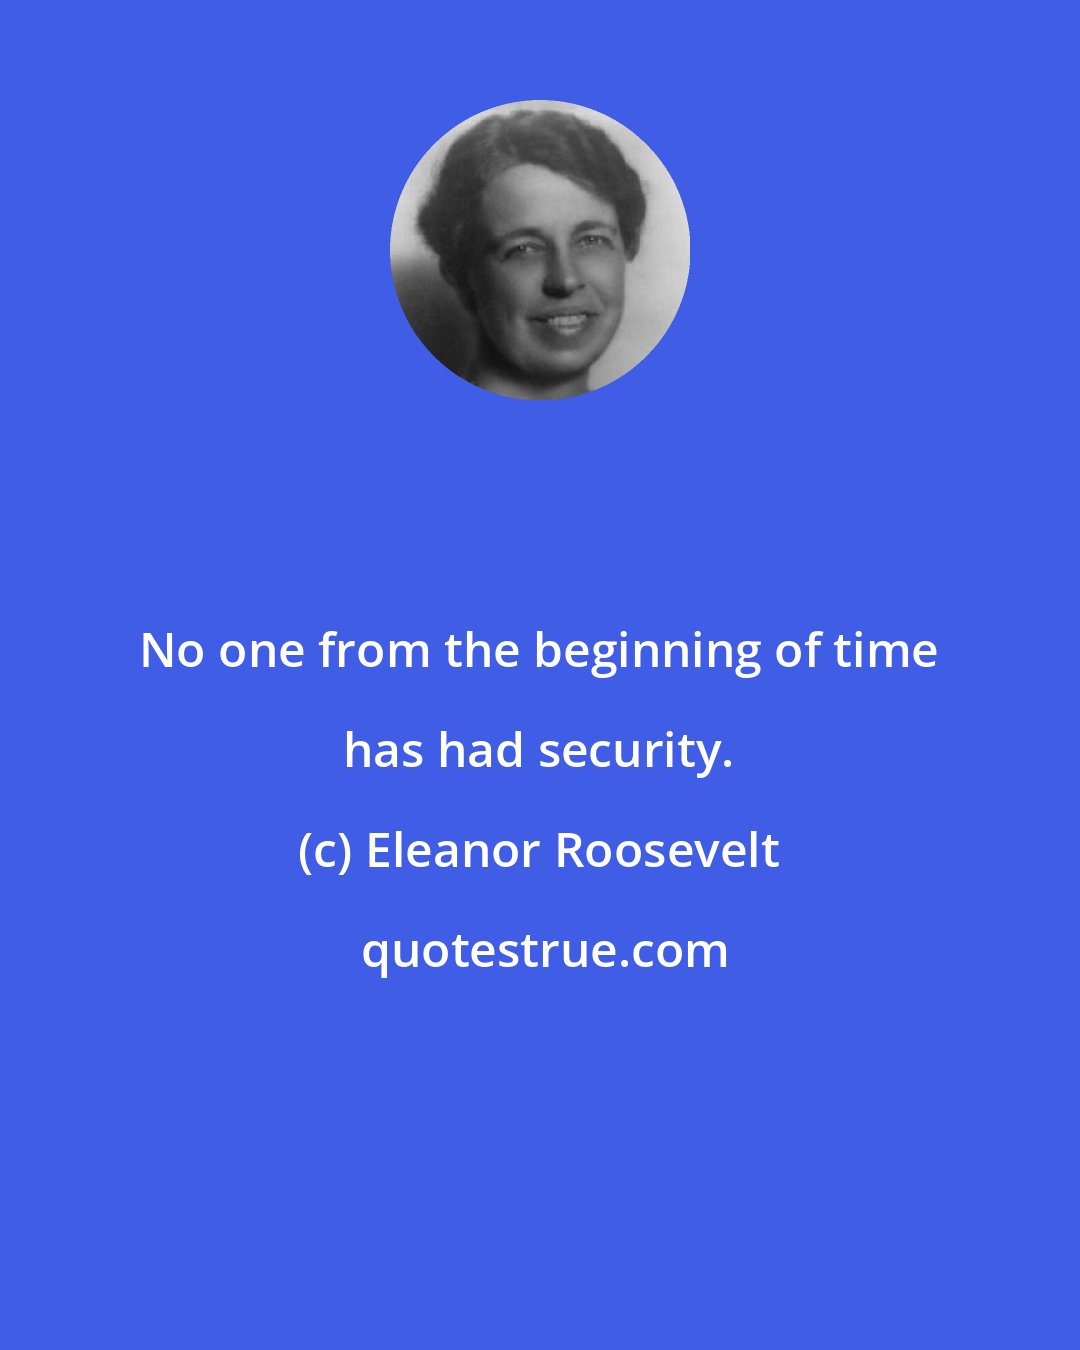 Eleanor Roosevelt: No one from the beginning of time has had security.